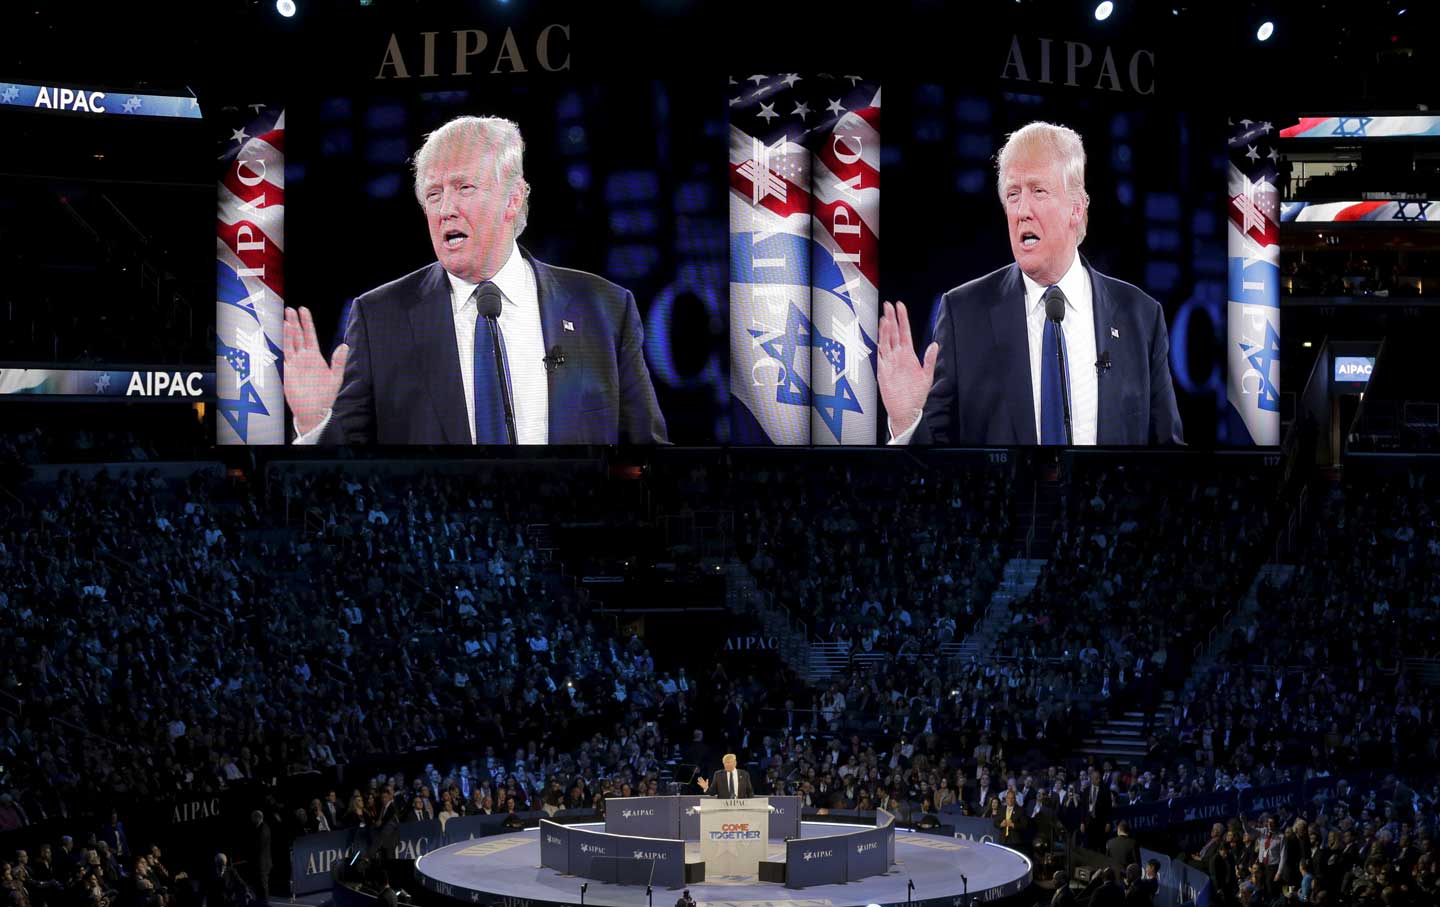 Donald Trump addresses the American Israel Public Affairs Committee (AIPAC) in Washington, DC, on March 21, 2016. (Reuters / Joshua Roberts)